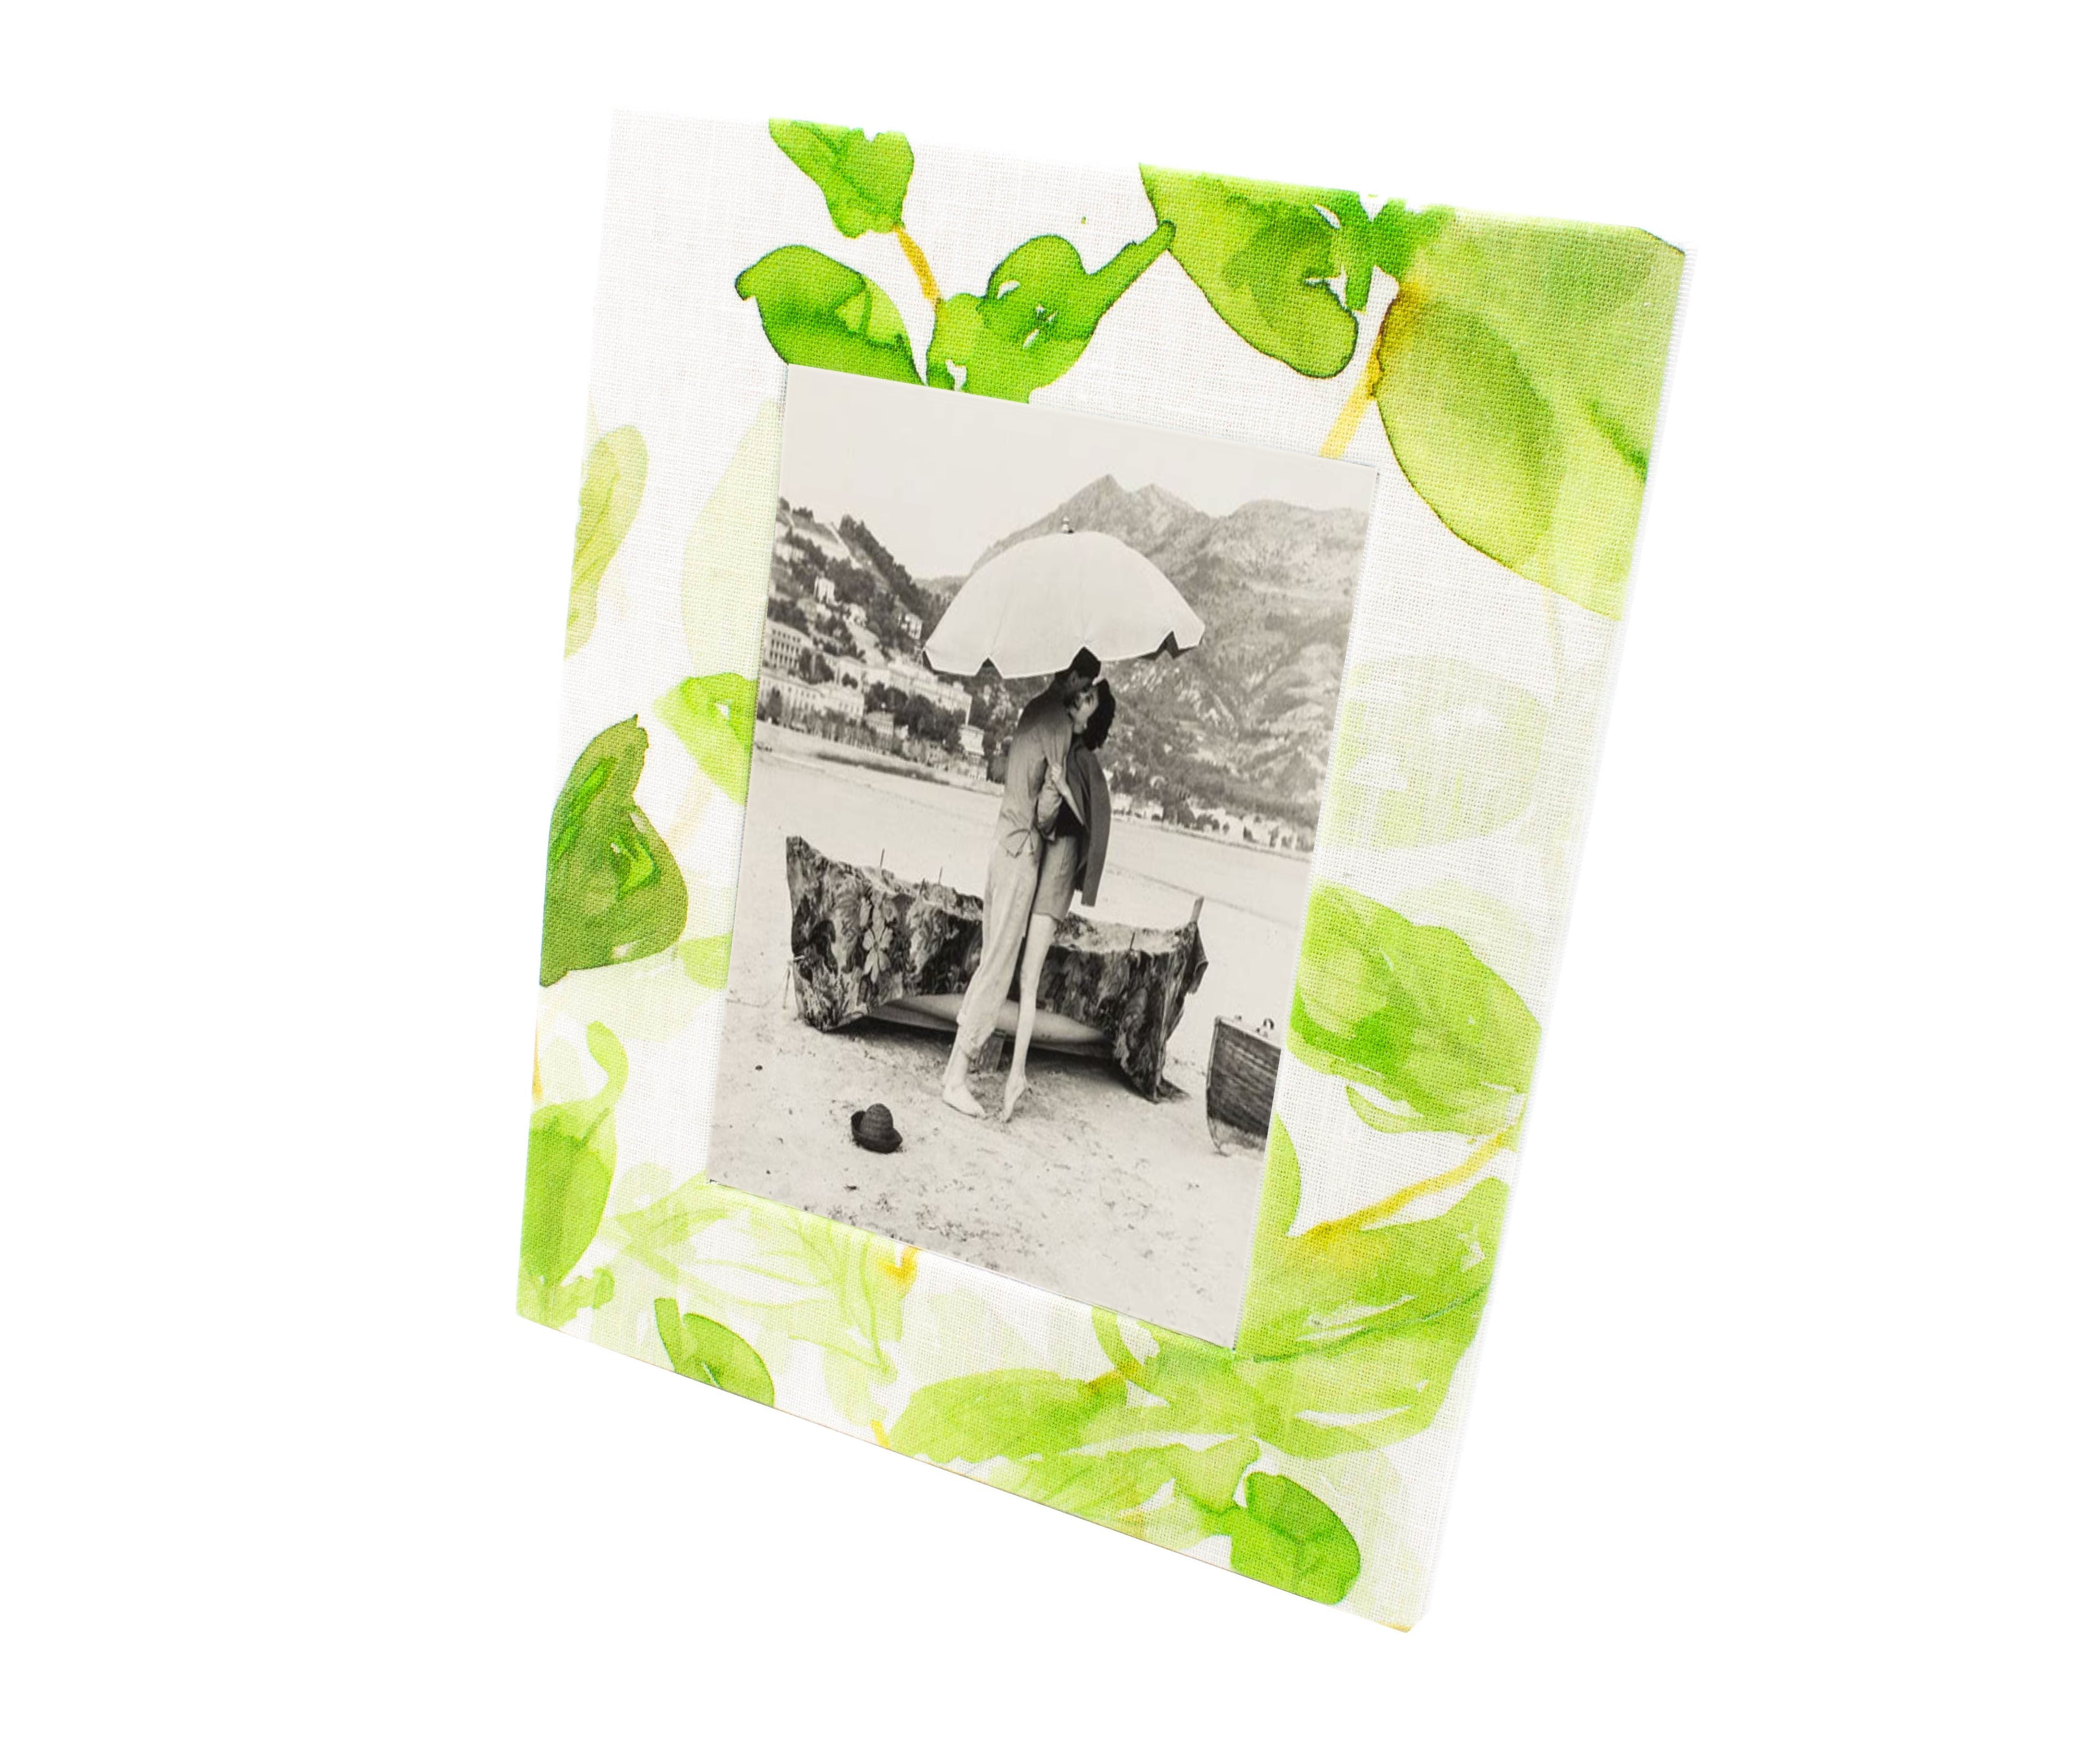 Fabric Photo Frame - Spring Leaves